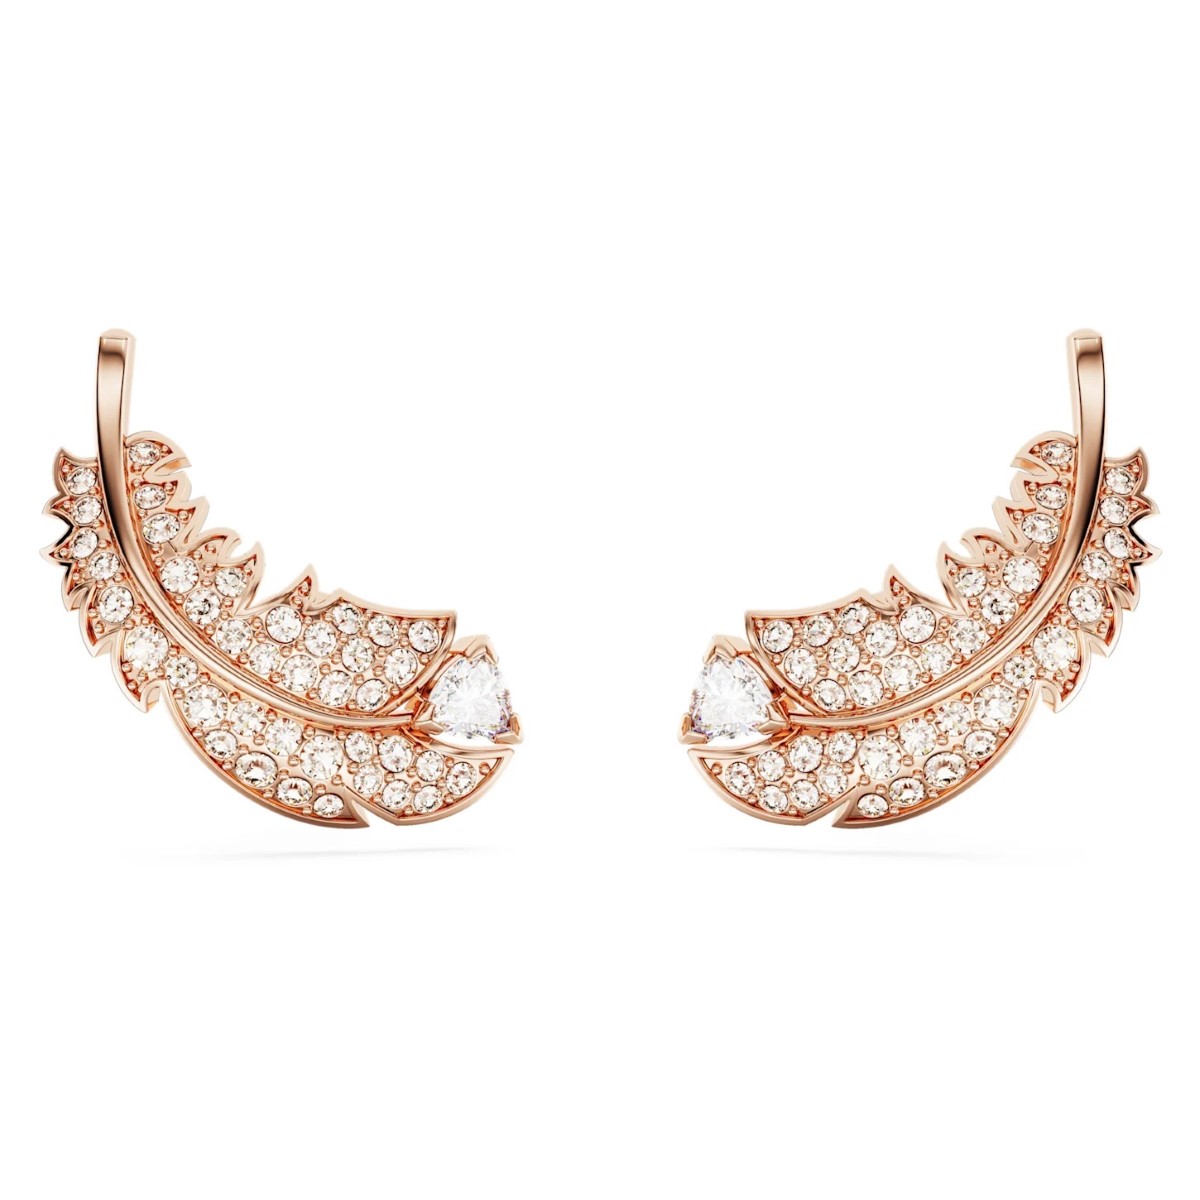 Swarovski Nice Feather Stud Earrings - White with Rose Gold Tone Plating 5663490